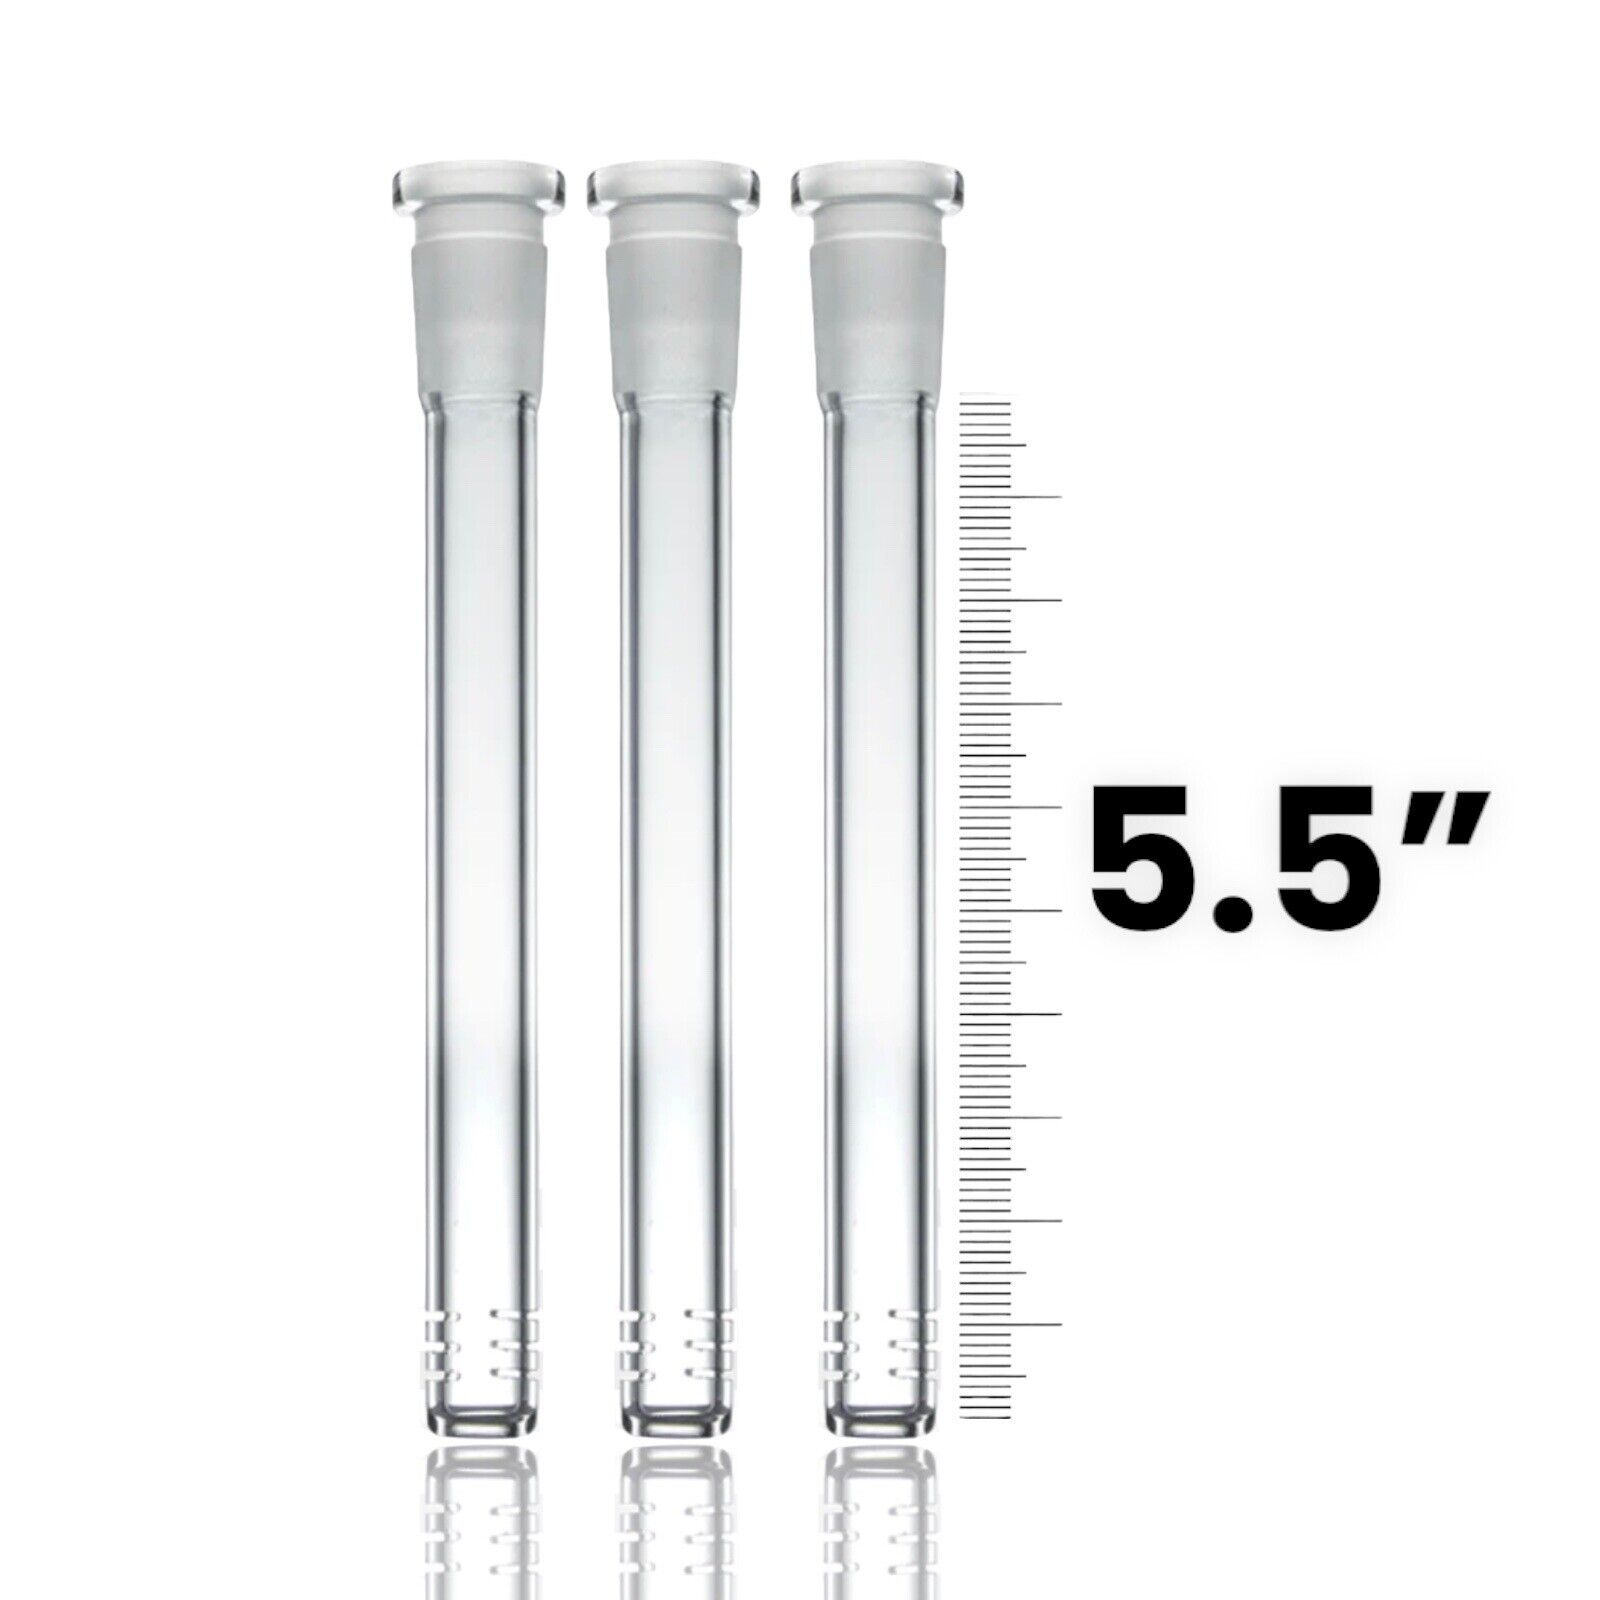 5.5” DOWNSTEM GLASS SLIDER (18MM TO 14MM) TOBACCO HOOKAH WATER PIPE - 3 PACK. Available Now for 16.99